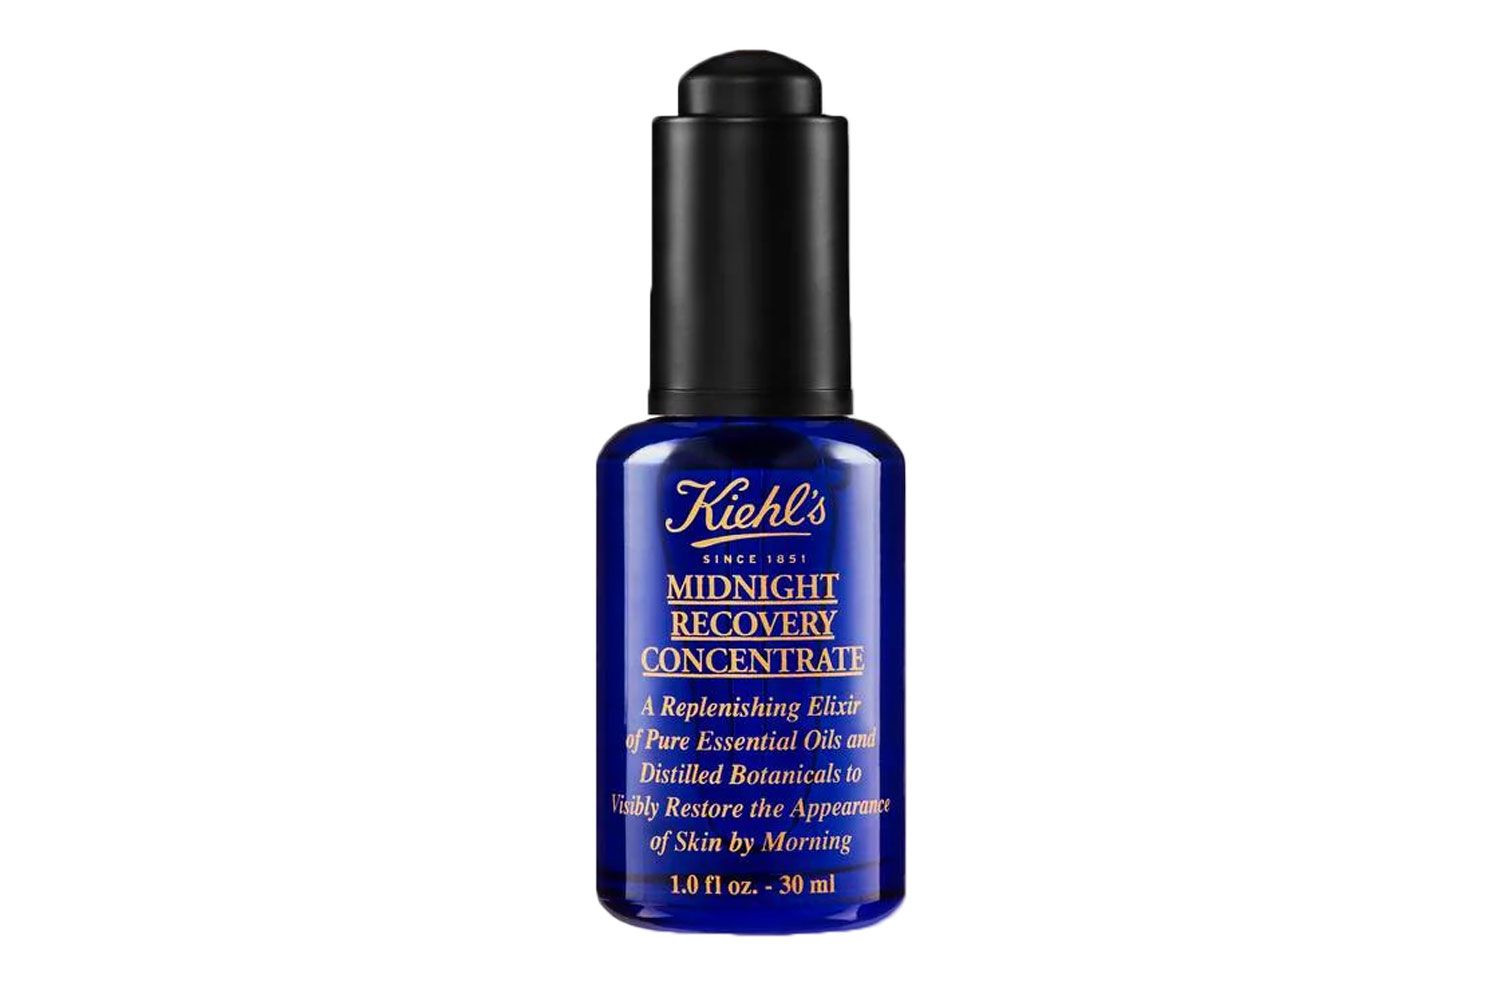 kiehls-midnight-recovery-concentrate-moisturizing-face-oil